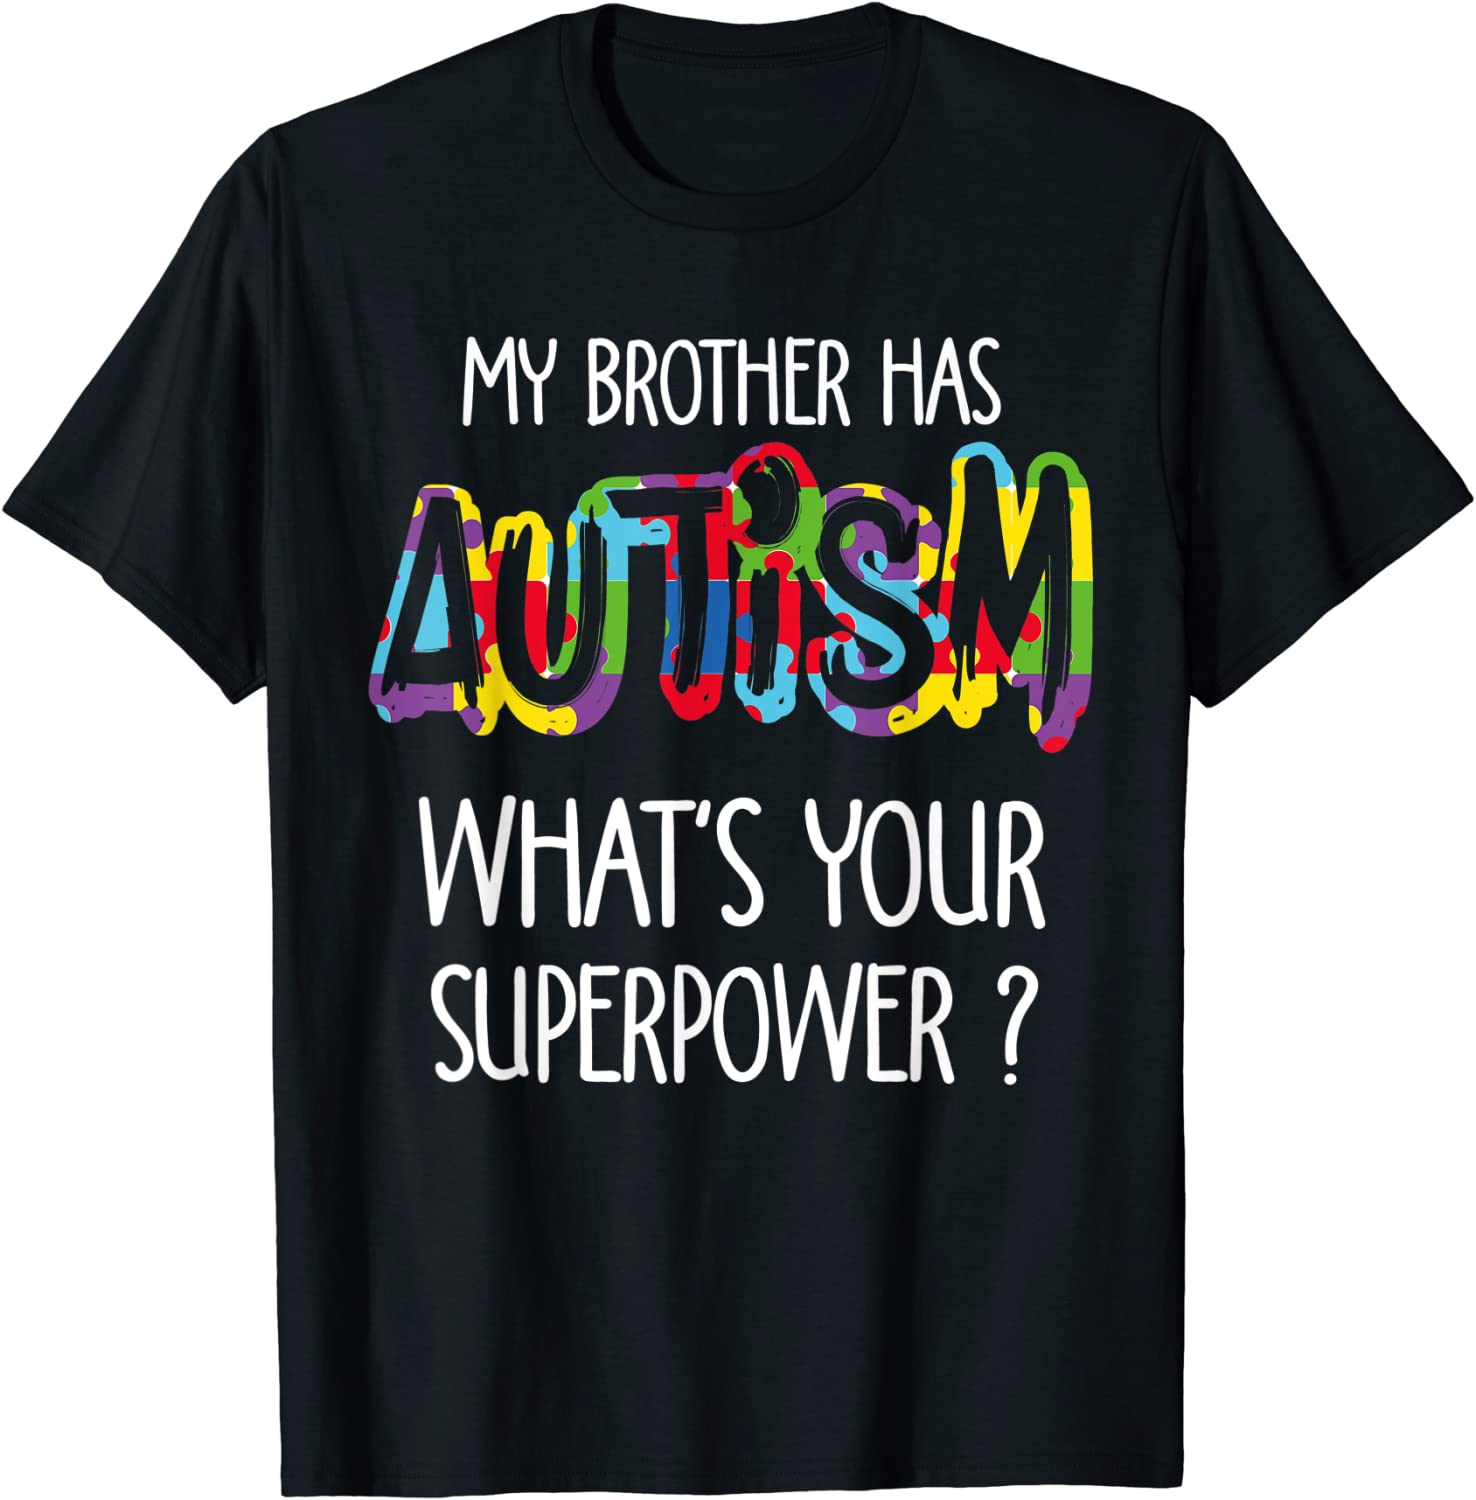 My Brother Has Autism What's Your Superpower Awareness T-Shirt Best Price